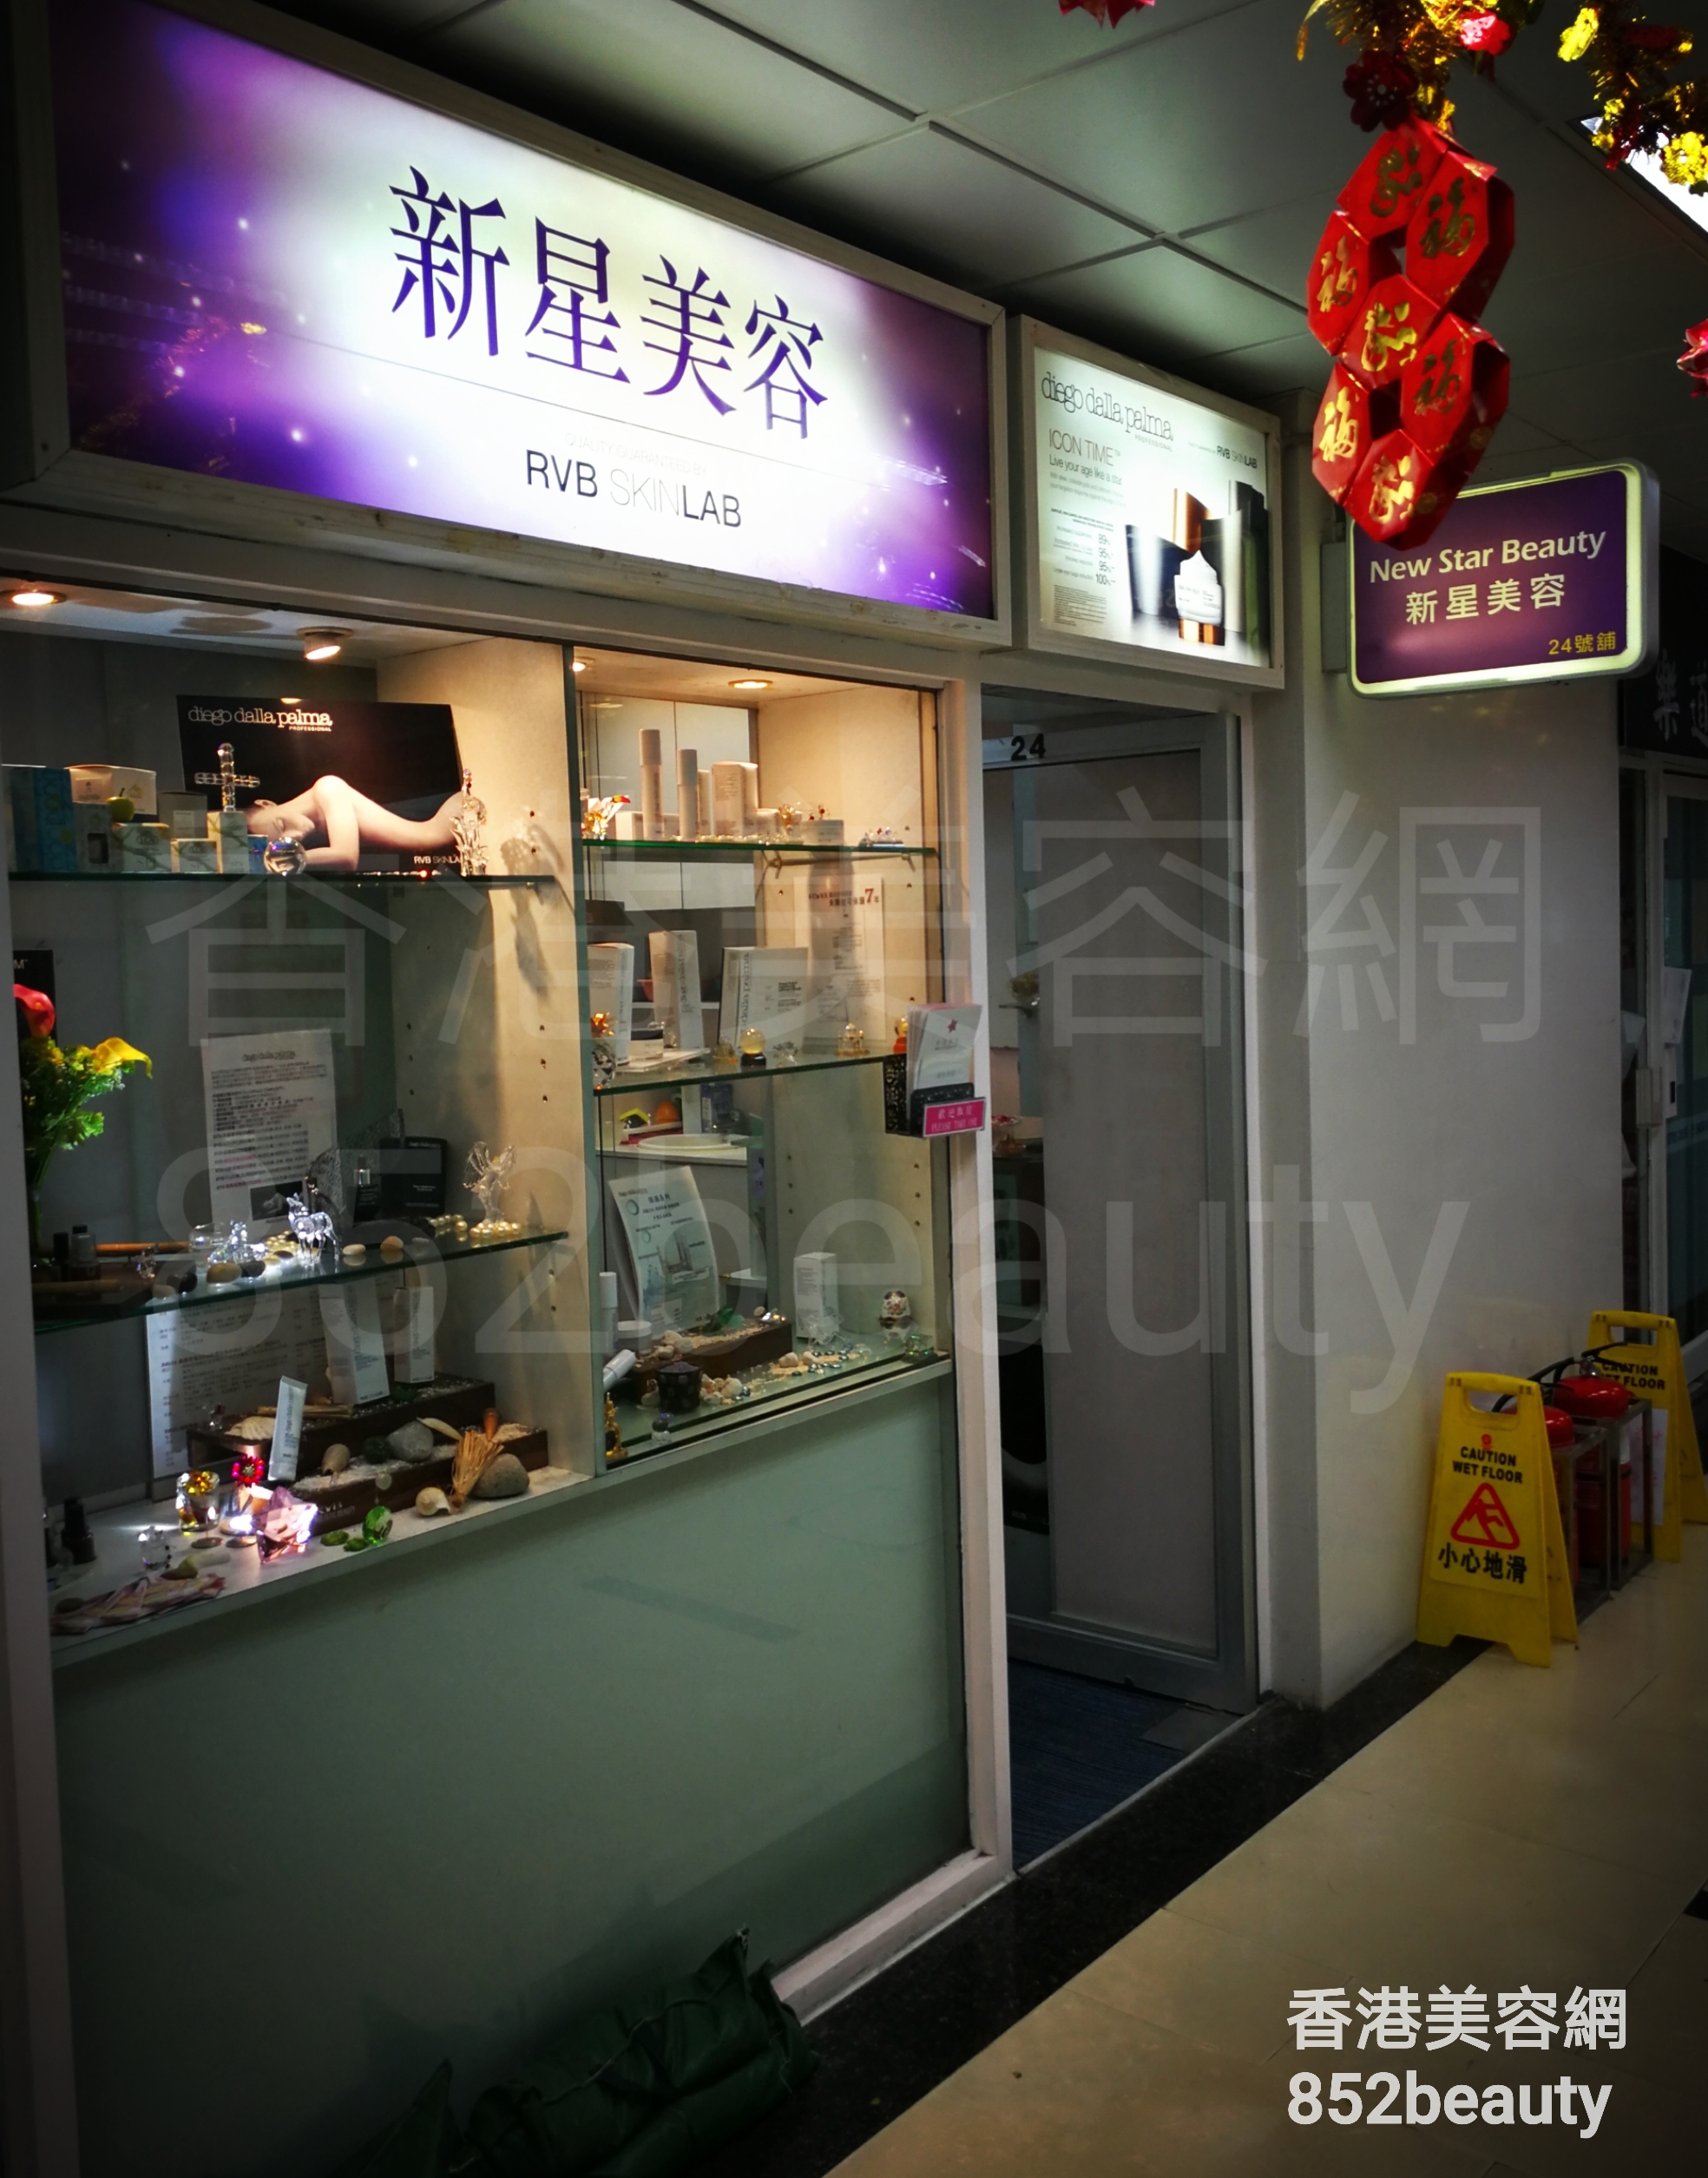 Hand and foot care: 新星美容